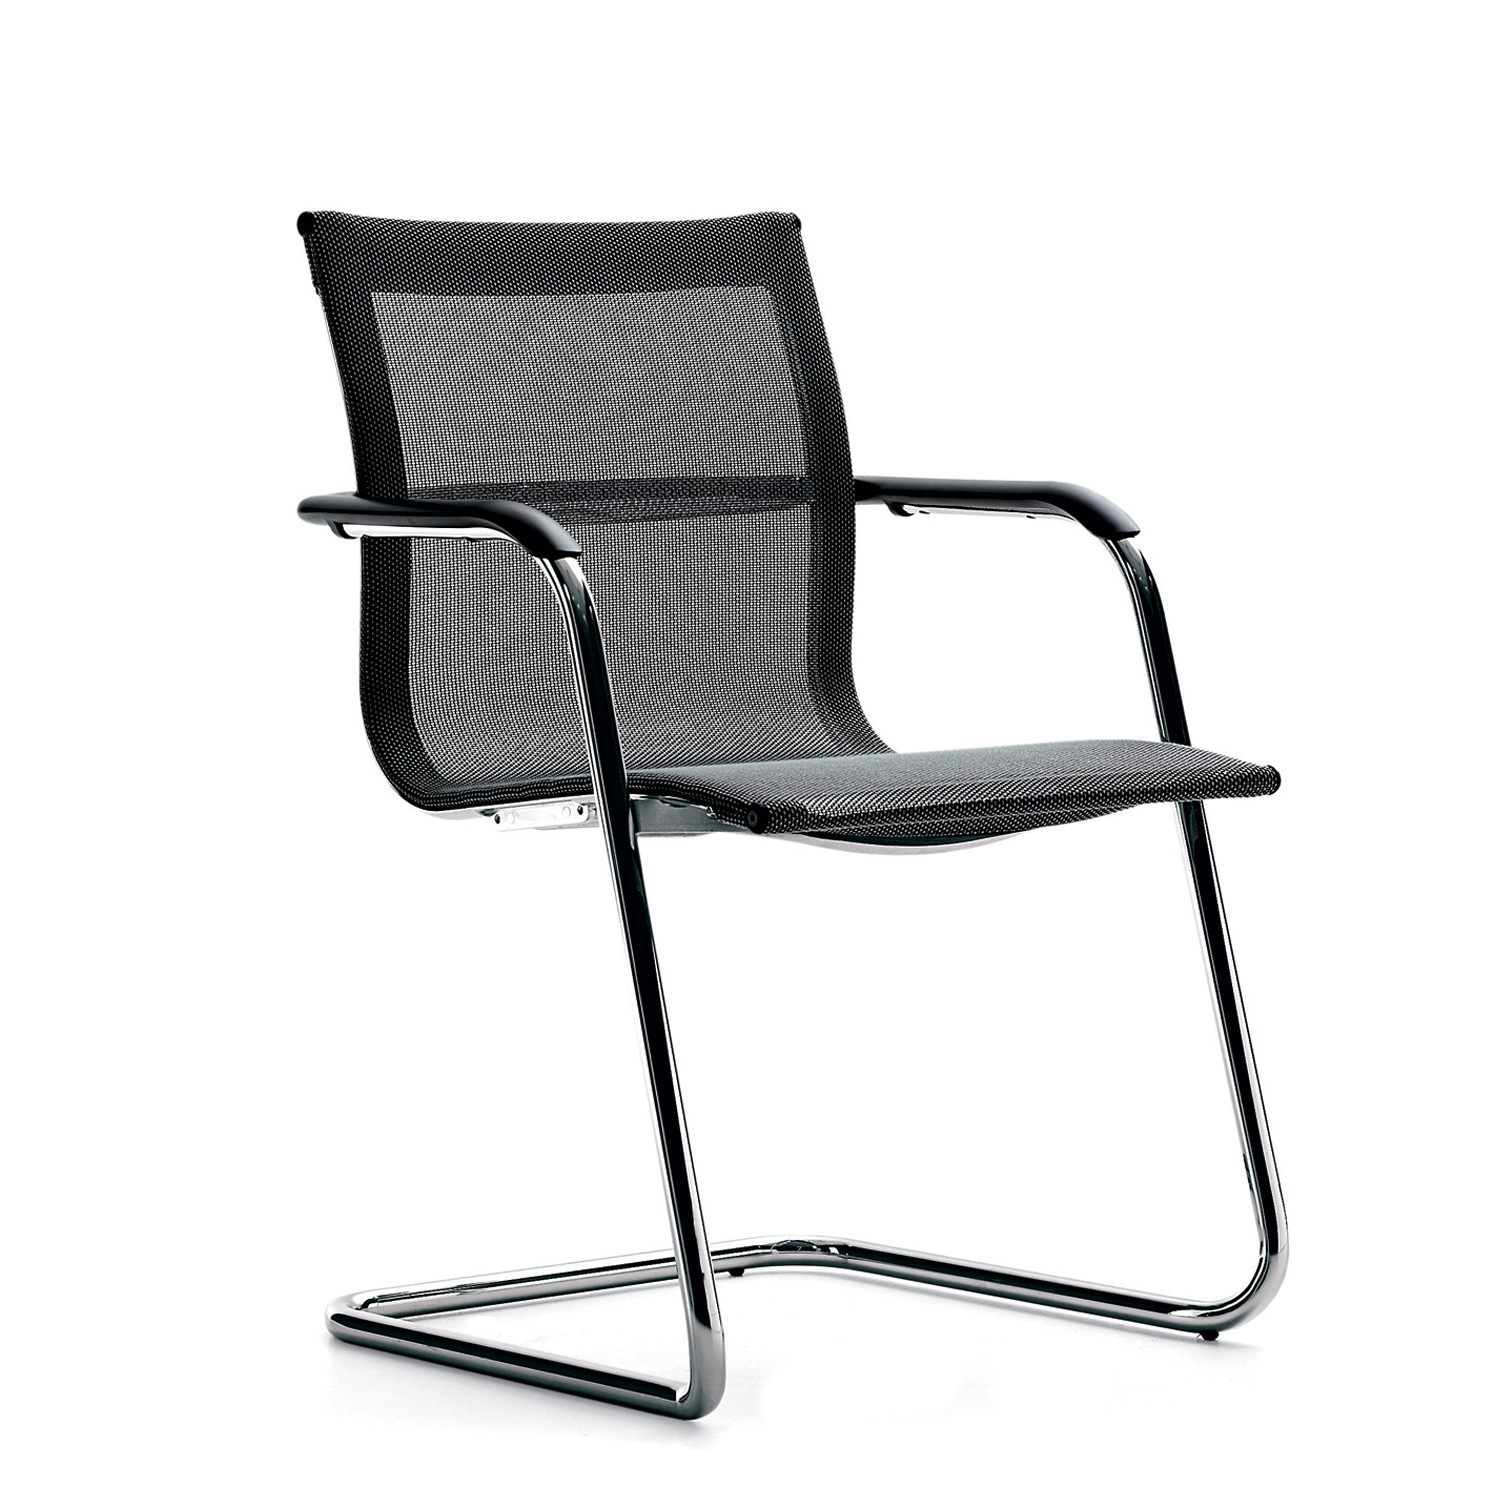 Relay Chairs with mesh back